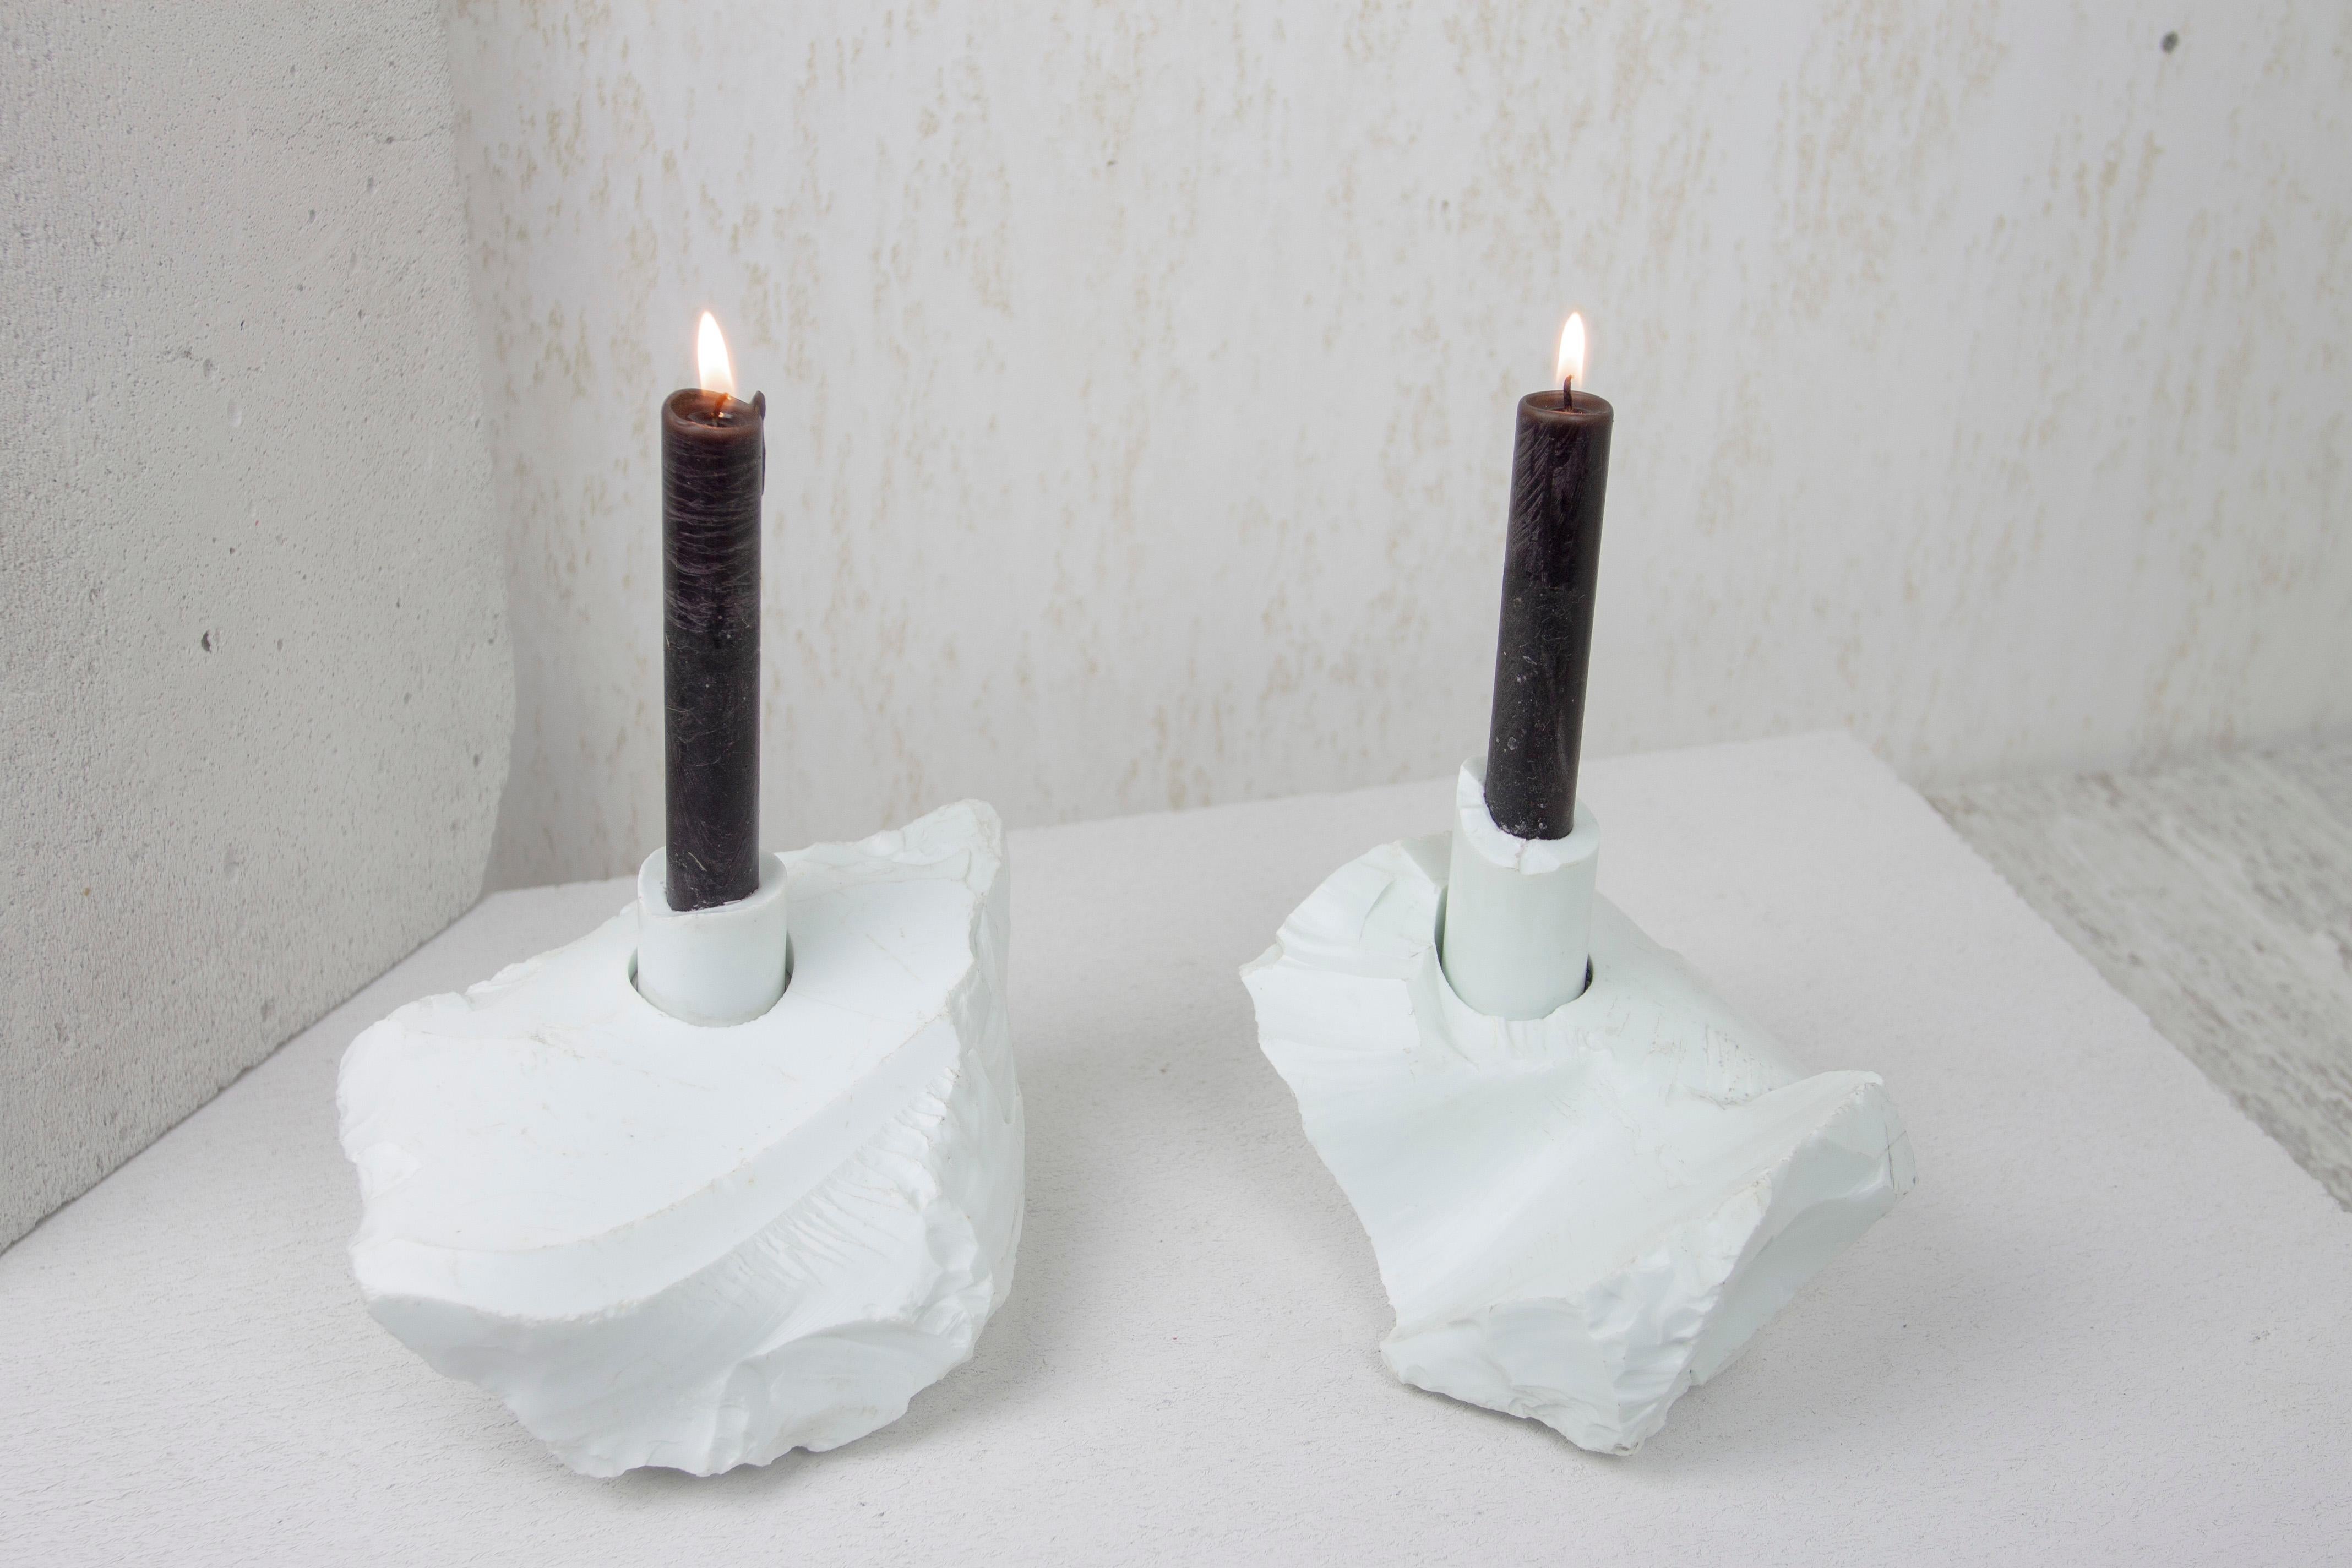 Set of 2 Manmade Porcellanite Abra Candelabra by Studio DO
Dimensions: D 20 x W 13 x H 9.5 cm / D 16 x W 12 x H 11.5 cm
Materials: Manmade porcellanite, aluminum.
8.4 kg.

Stone and fire are connected in an ageless bond. A sparkle created by